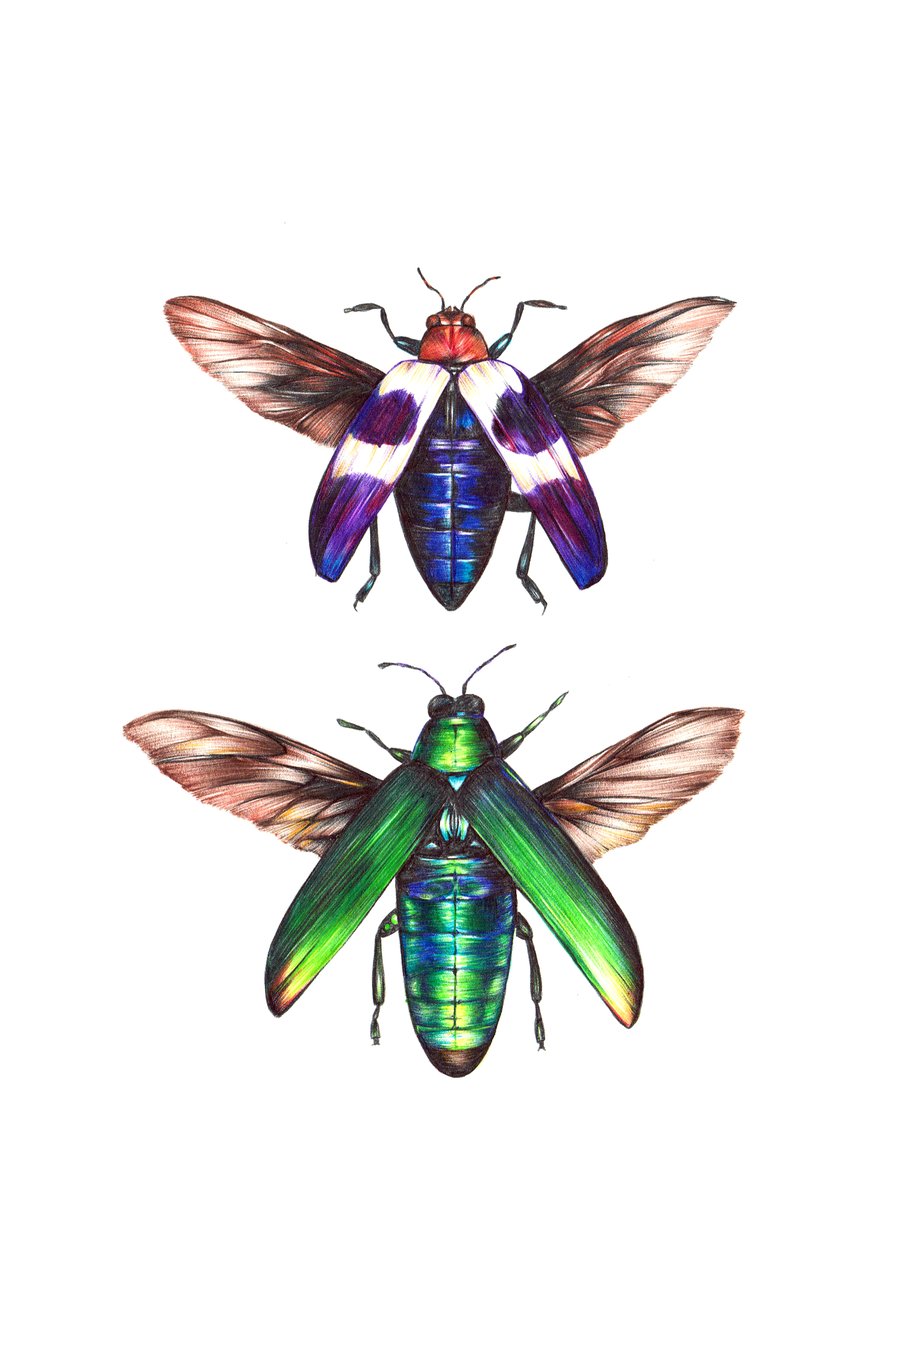 Image of Winged Jewel Beetles - Open Edition Print